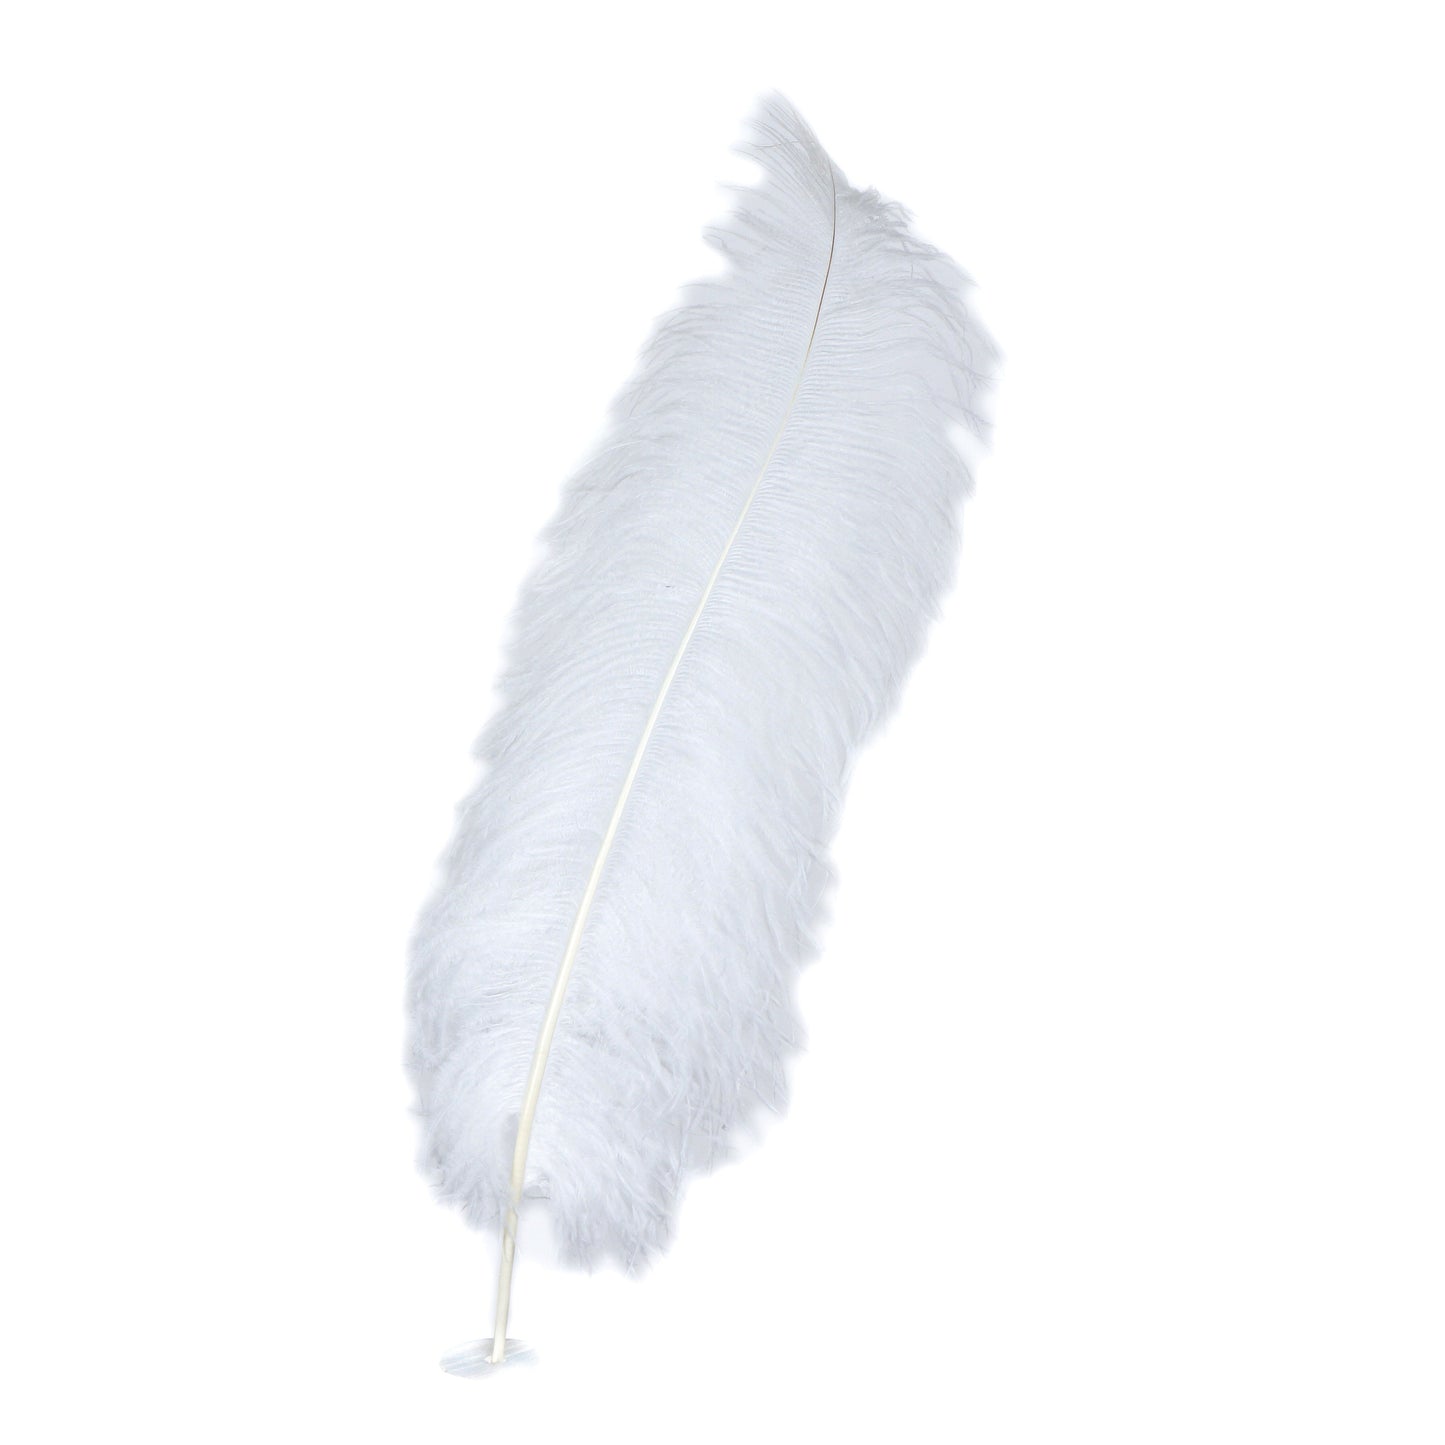 Large Ostrich Feathers - 18-24" Spads - White